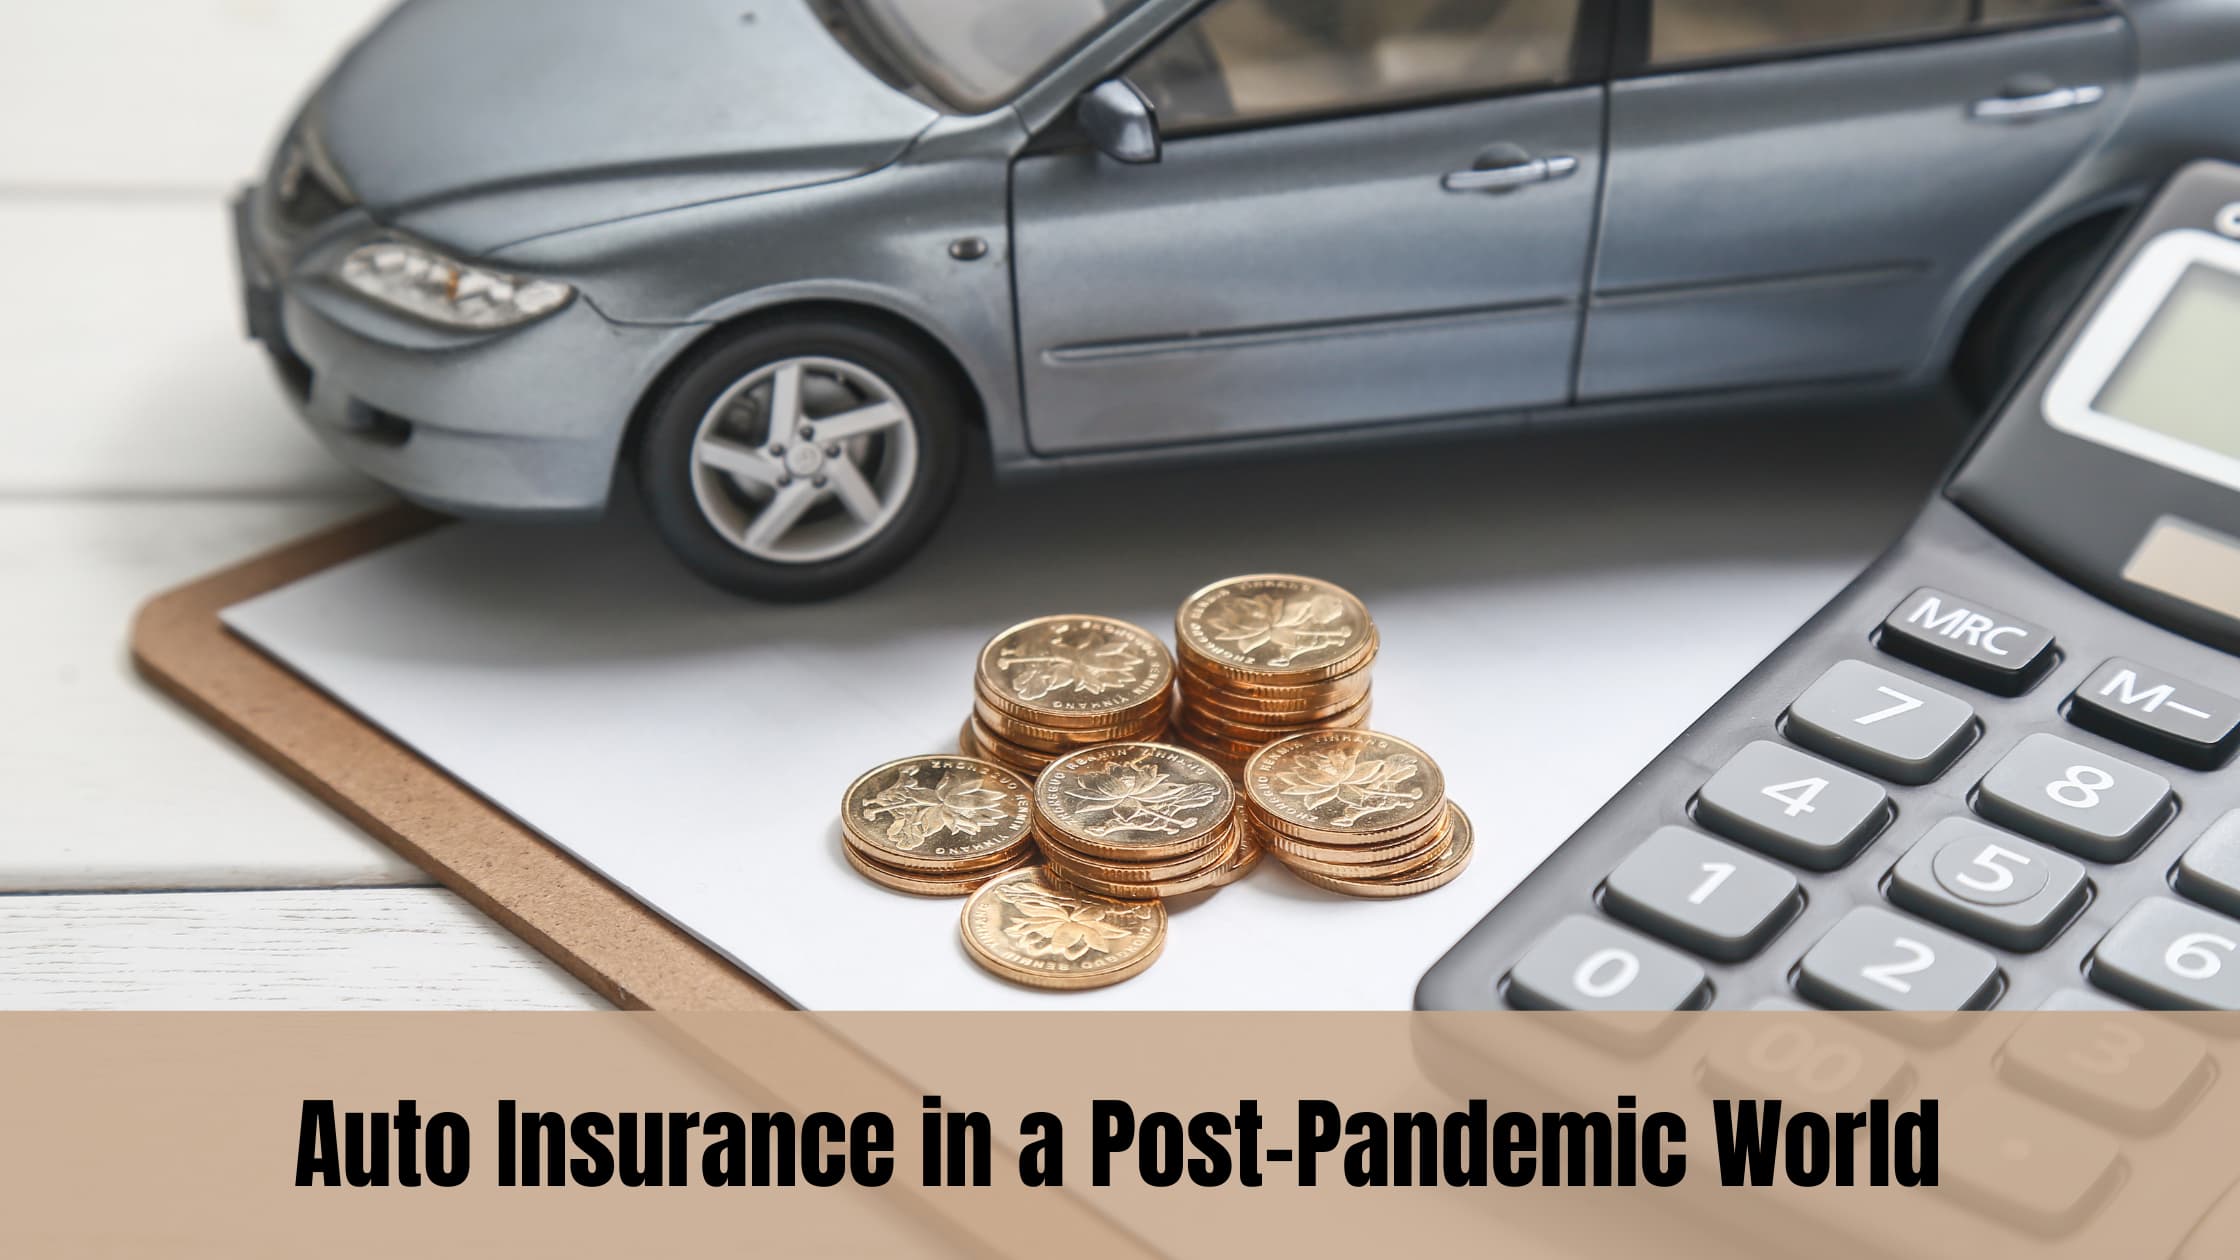 Auto Insurance in a Post-Pandemic World